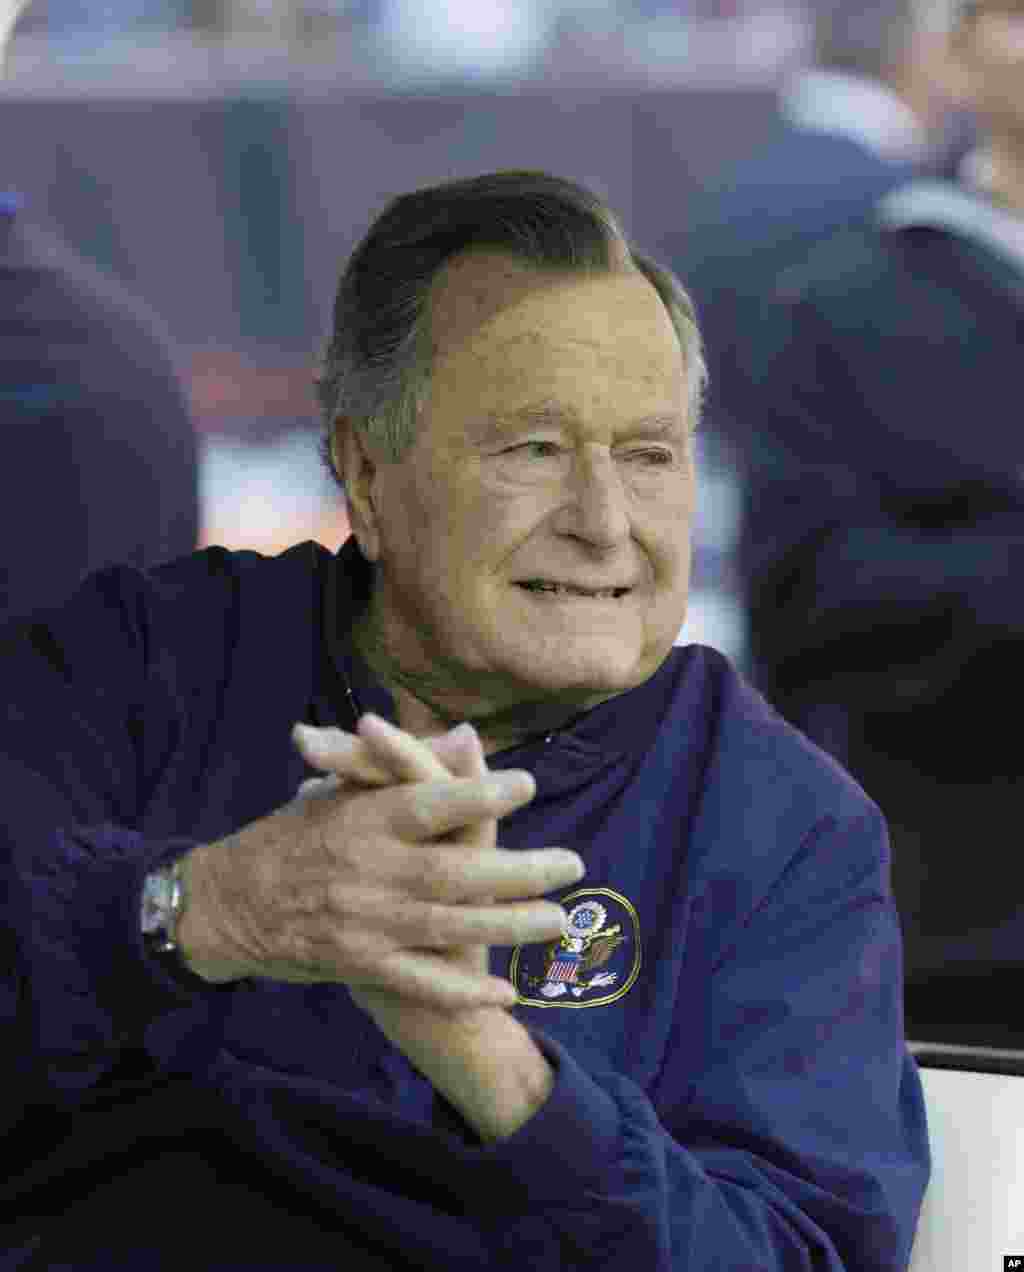 Former president George H. W. Bush attends an NFL football game between the Houston Texans and Cincinnati Bengals, Houston, Nov. 23, 2014.